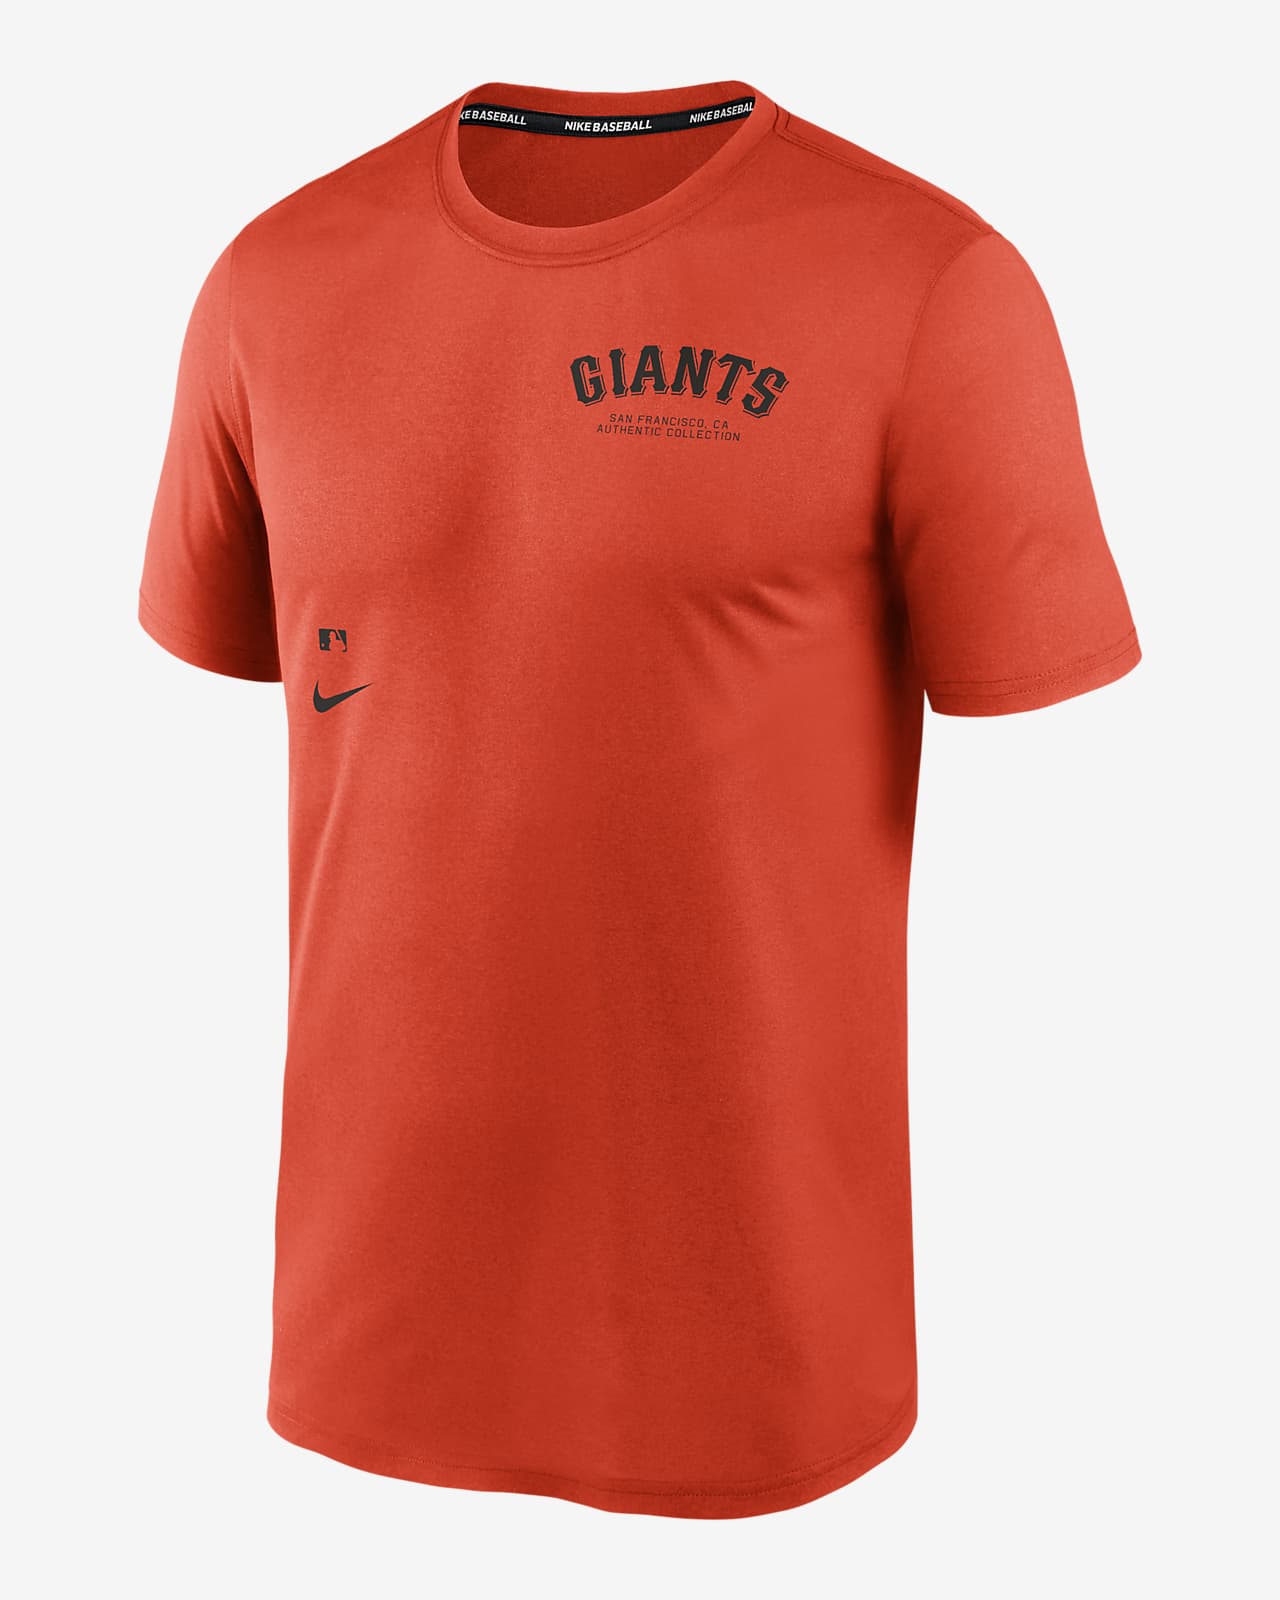 San Francisco Giants Authentic Collection Early Work Men’s Nike Dri-FIT MLB T-Shirt